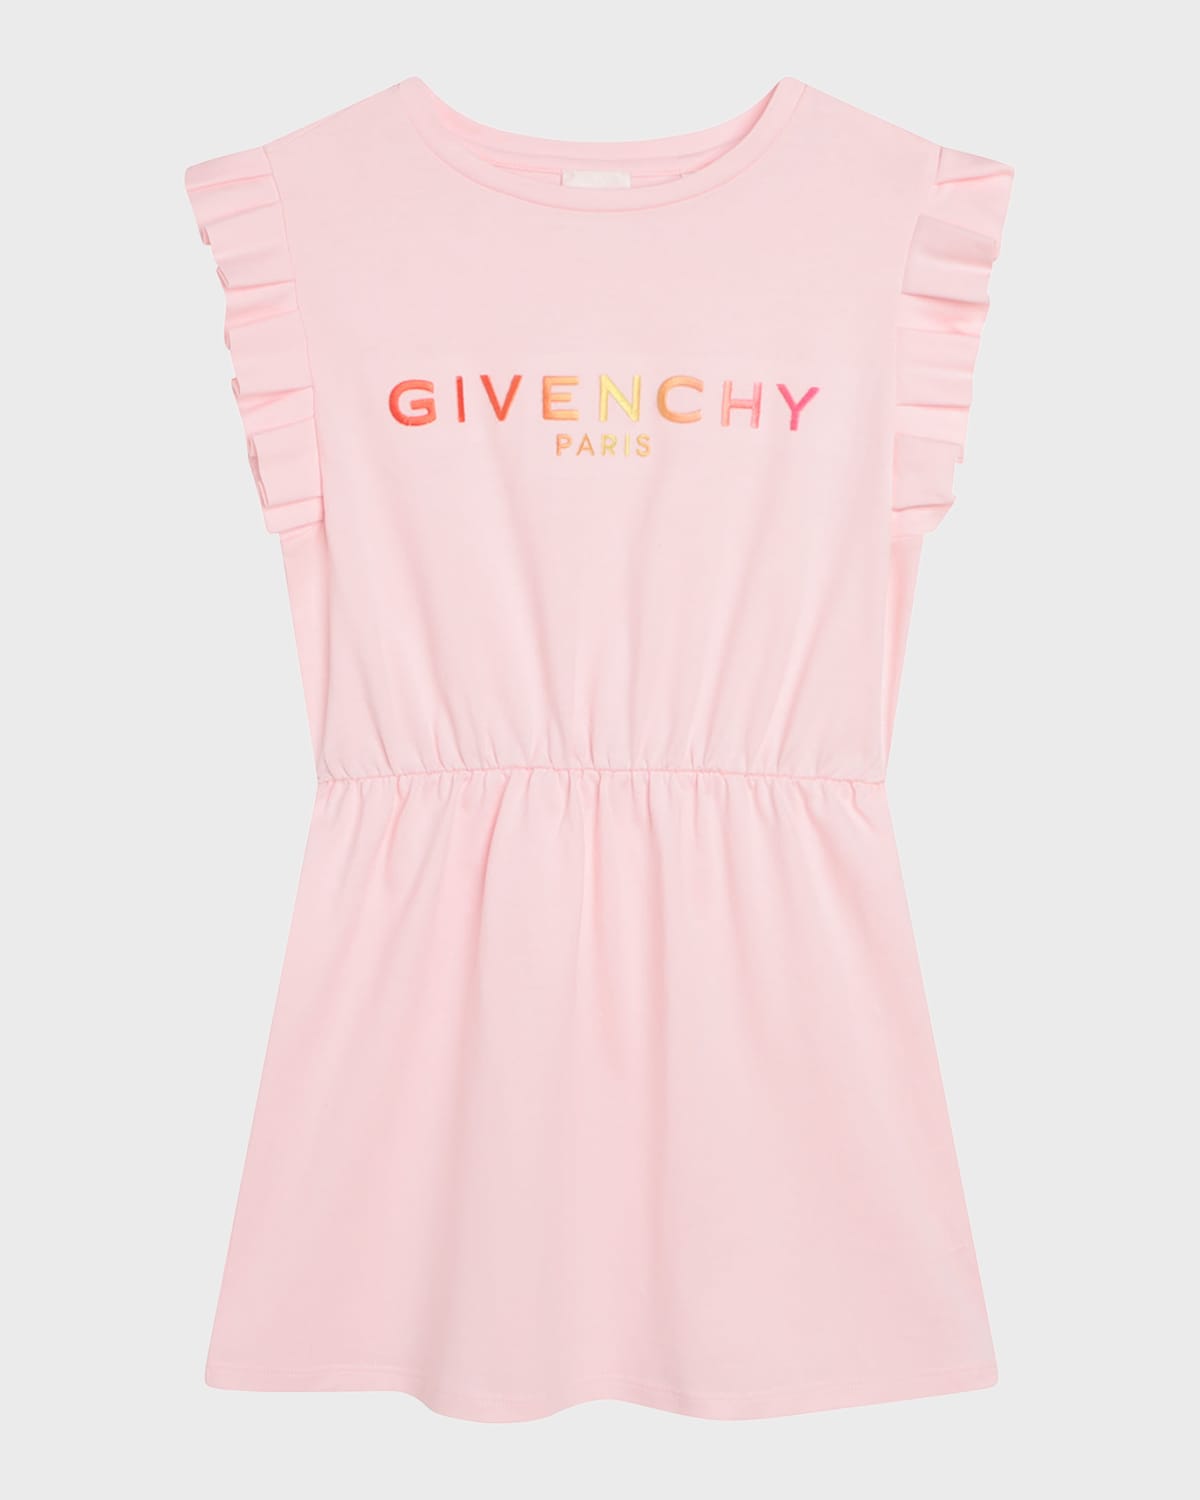 GIVENCHY GIRL'S LOGO JERSEY DRESS WITH RUFFLES